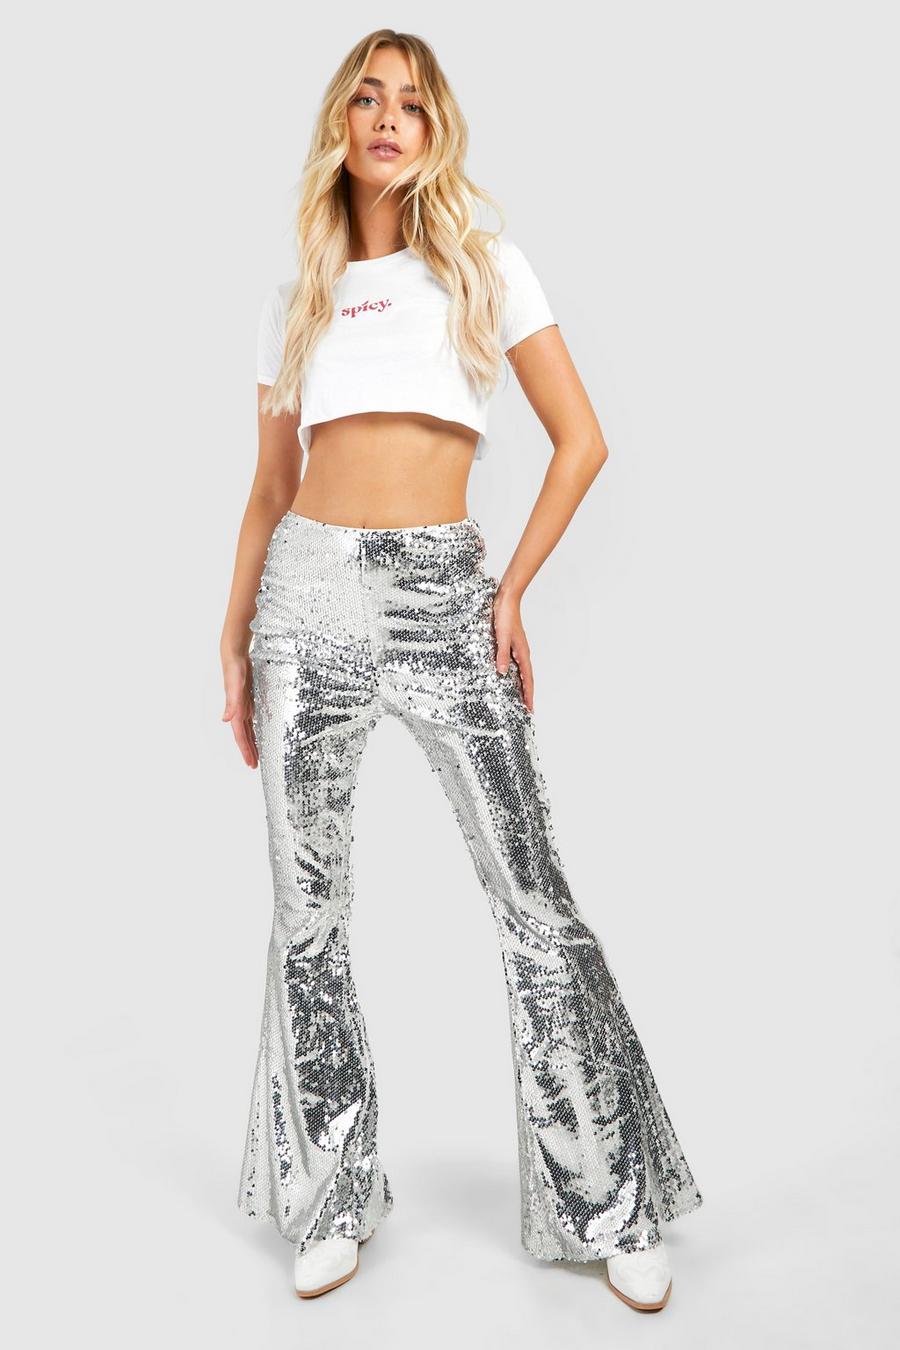 Silver Festival High Waisted Sequin Flares